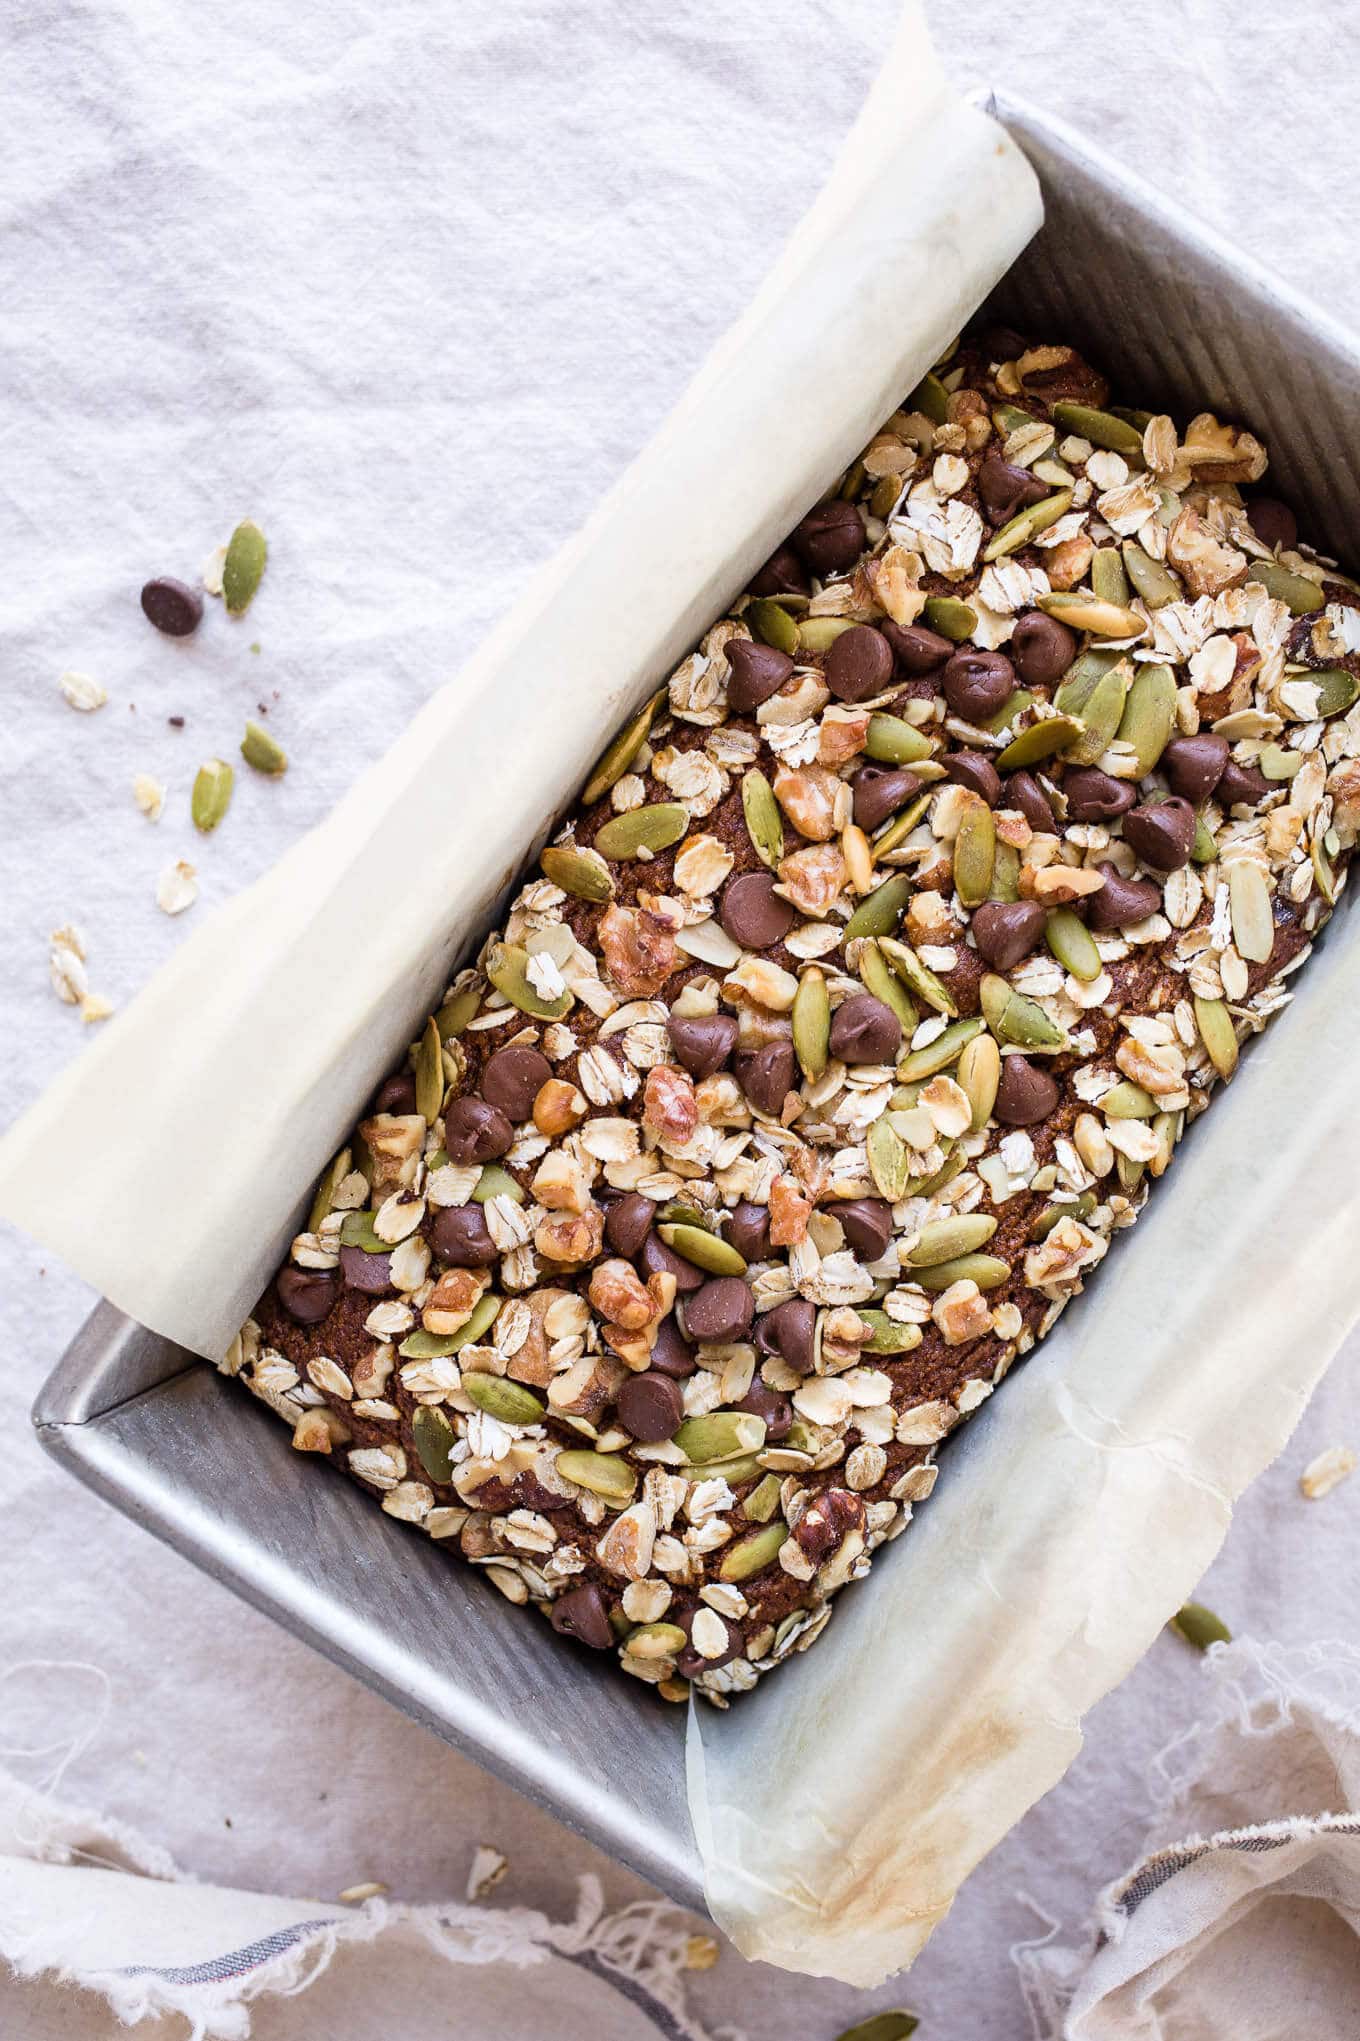 Quick bread with nuts and seeds in a loaf pan.